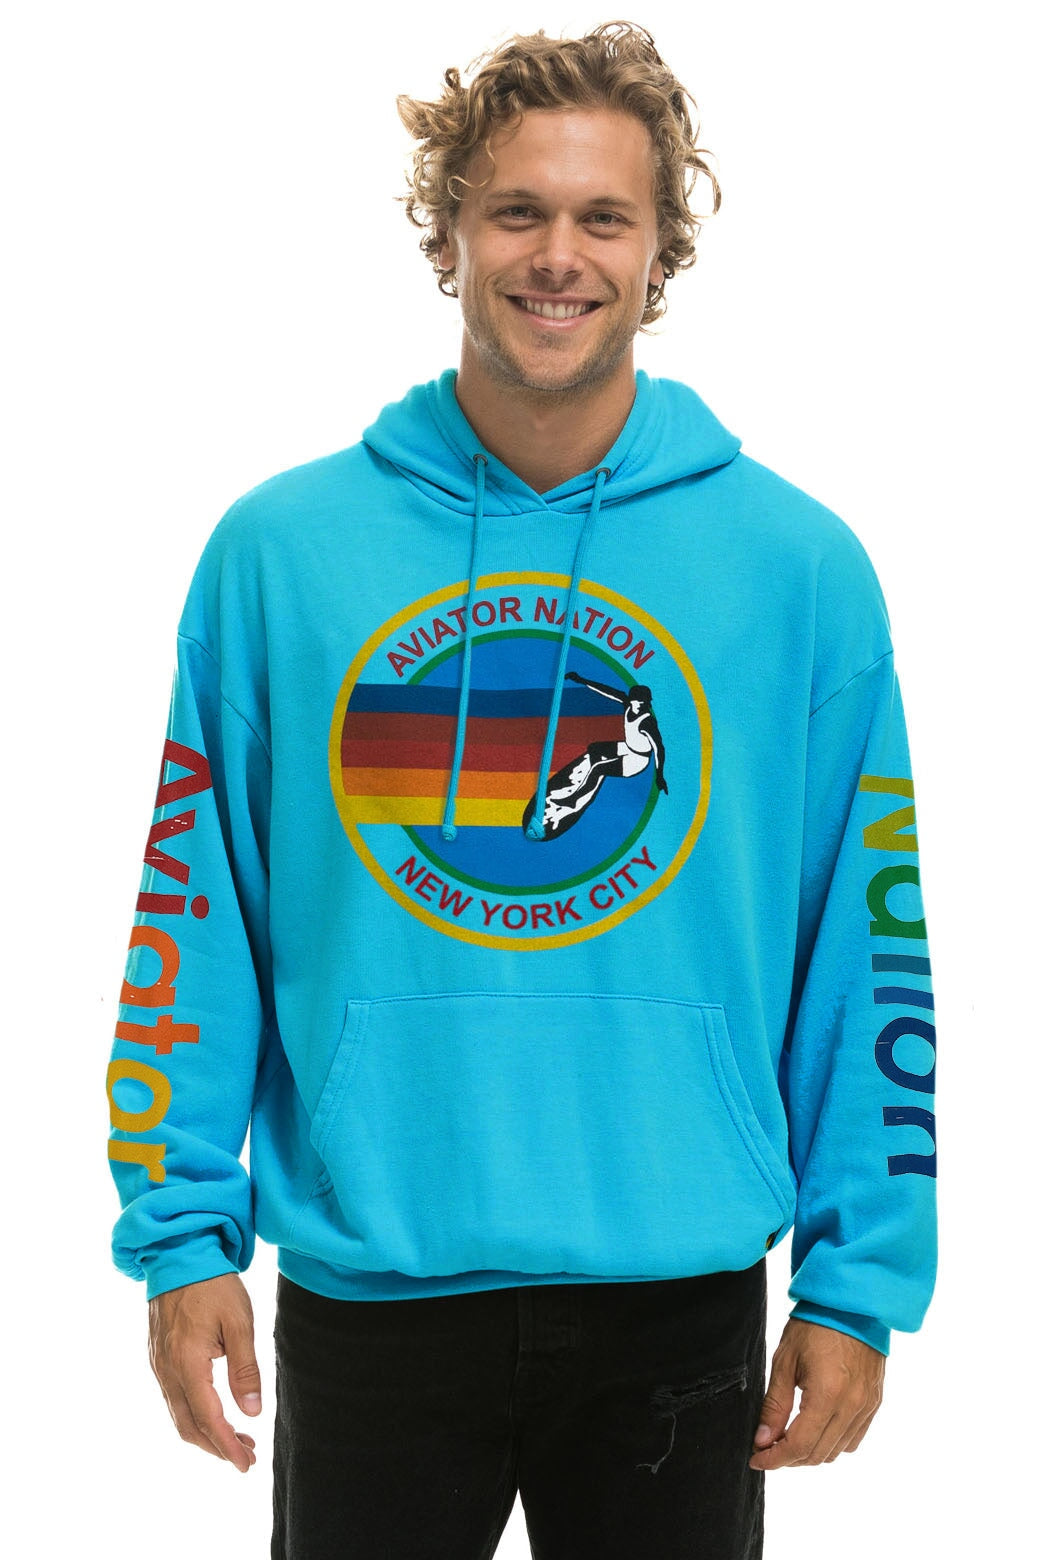 AVIATOR NATION NEW YORK CITY RELAXED PULLOVER HOODIE - NEON BLUE Hoodie Aviator Nation 